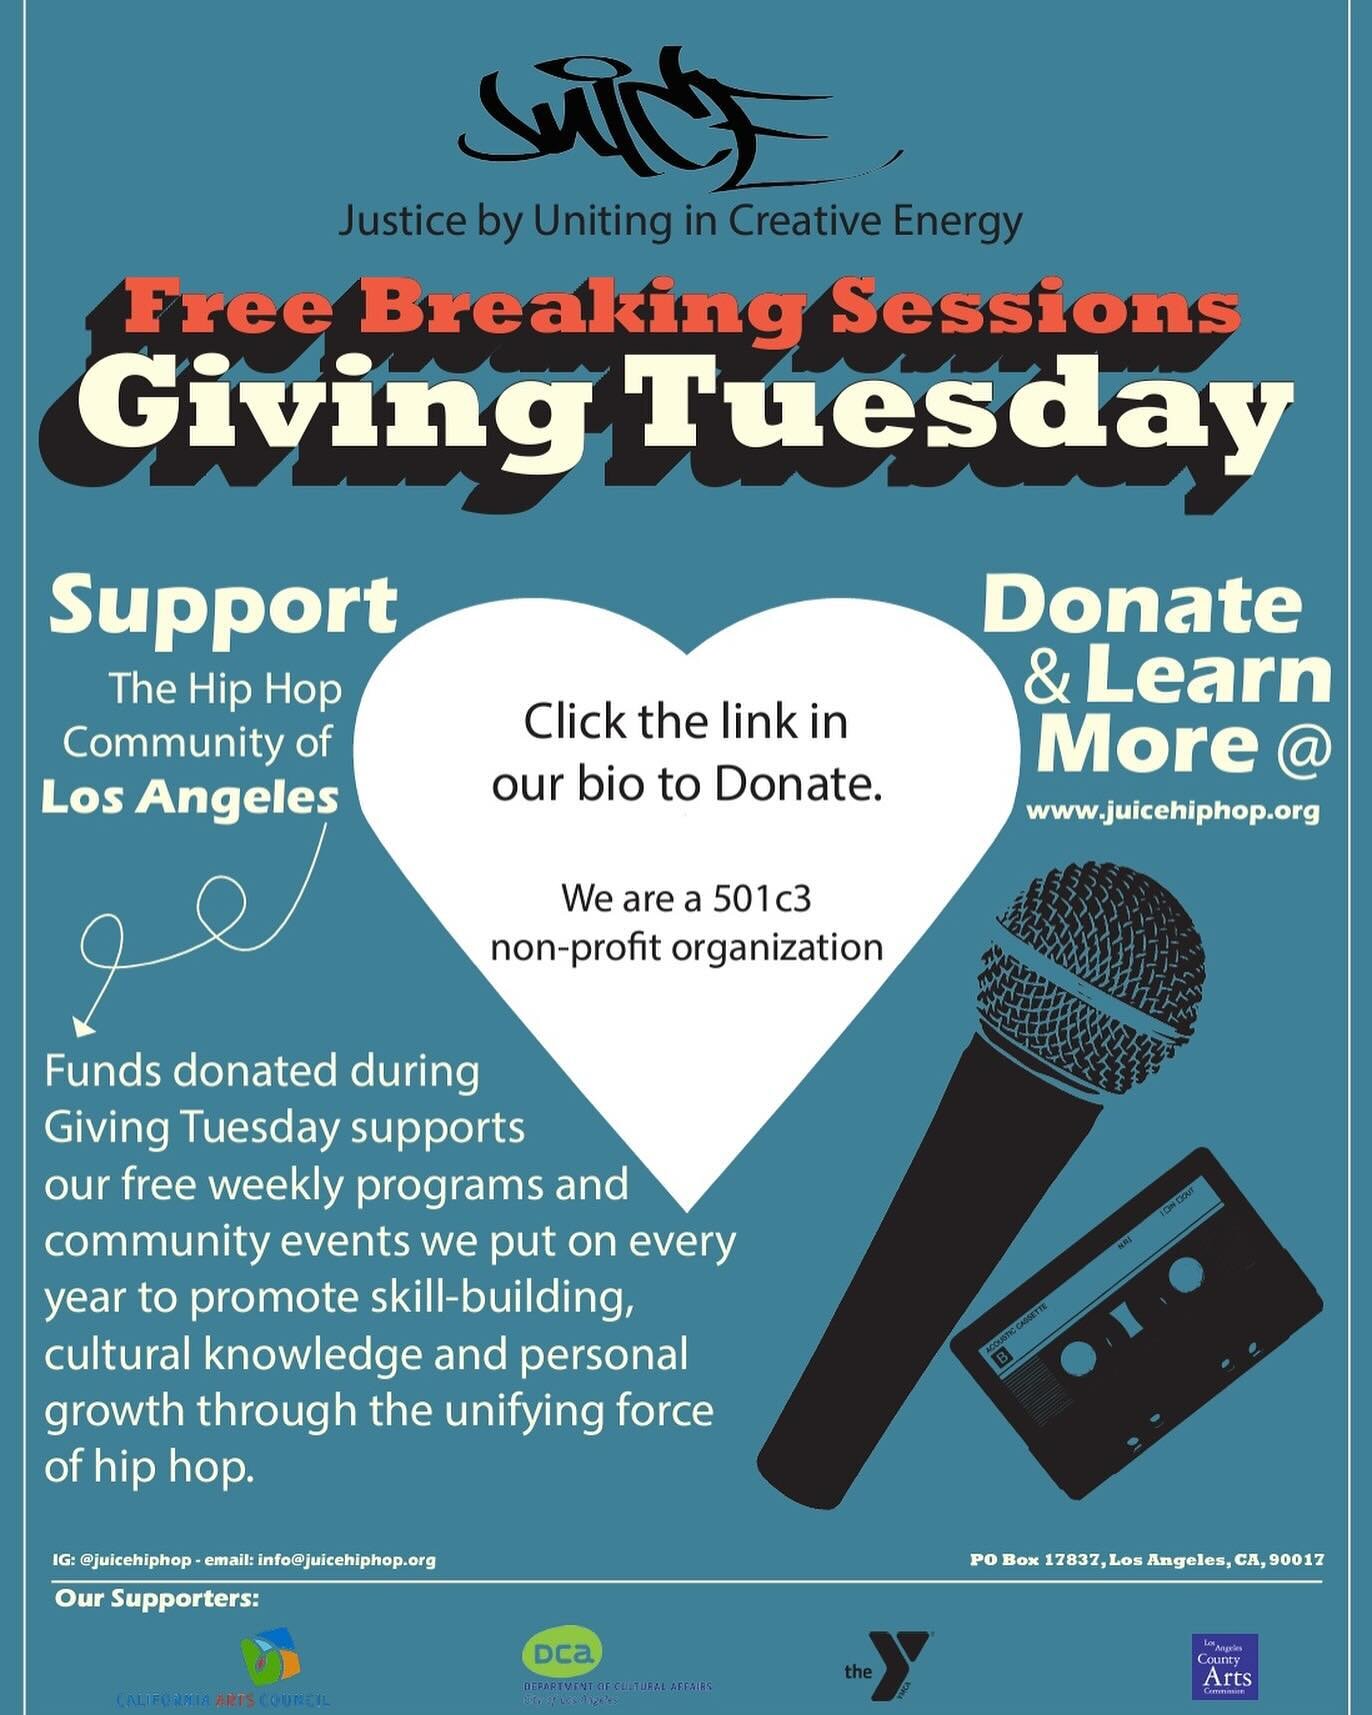 Our weekly free programs rely the support from generous individuals that donate to our organization. In this giving season, if you feel called to contribute any amount, we would be grateful. Your donations help support our weekly free breaking progra